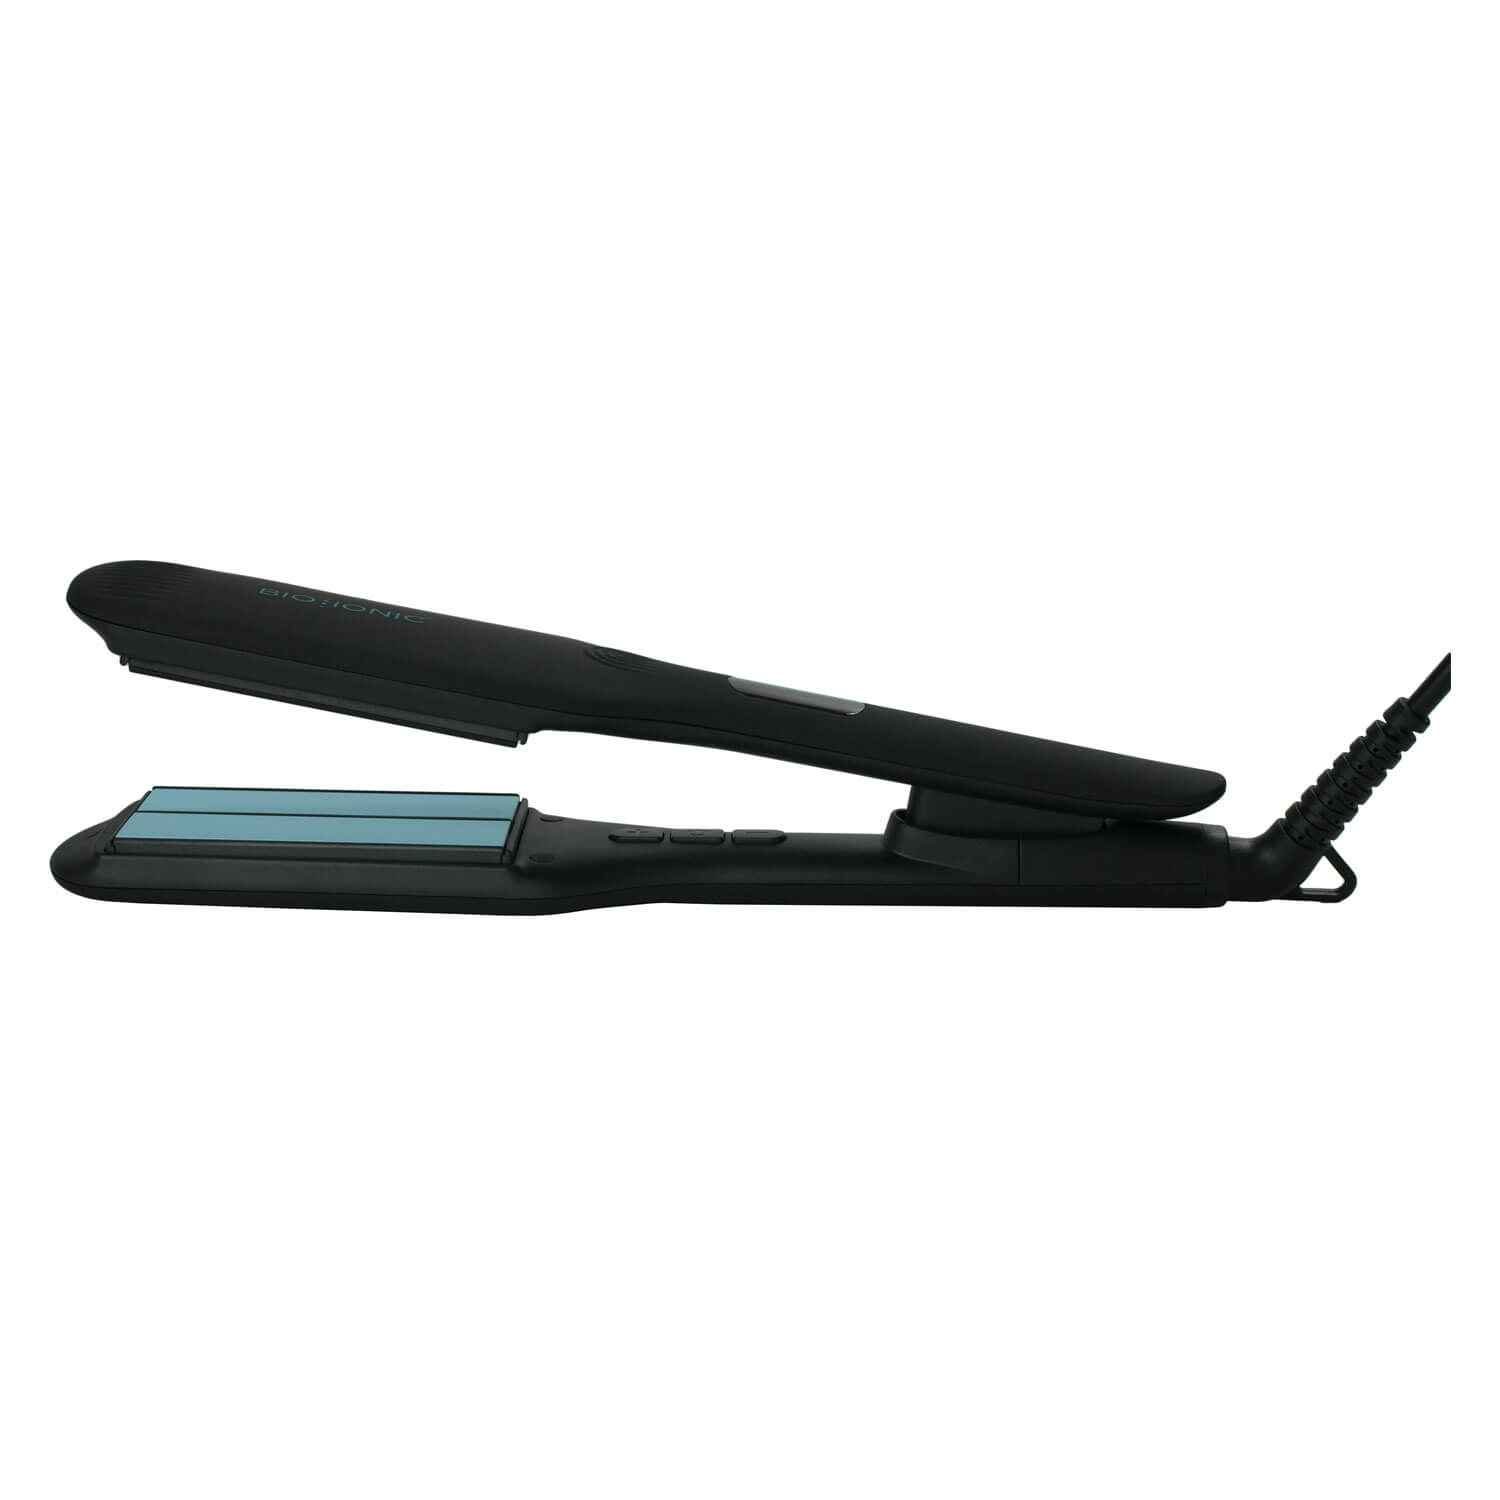 Product image from iTools - Onepass Styling Iron 3.8cm